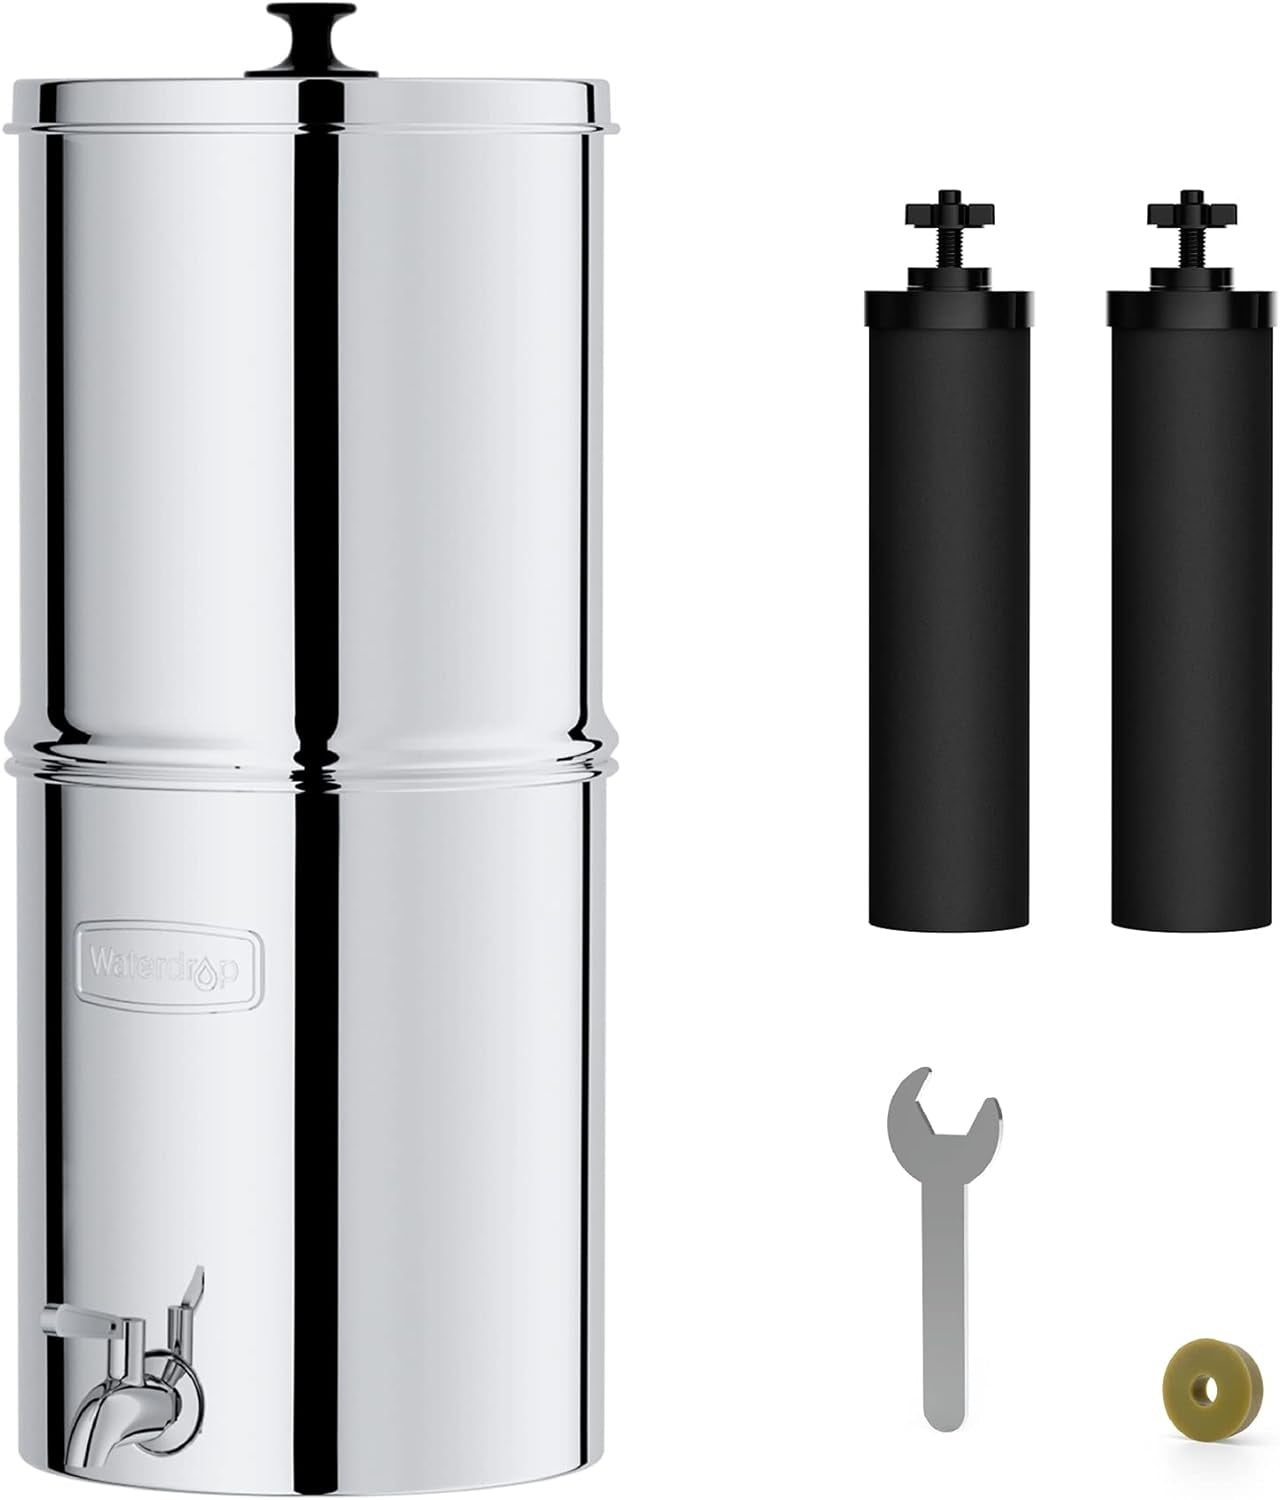 Waterdrop Gravity-fed Alkaline Water Filter System, Reduces Lead and up to 99% of Chlorine, with 2 Black Carbon Filters and Metal Spigot, King Tank Series